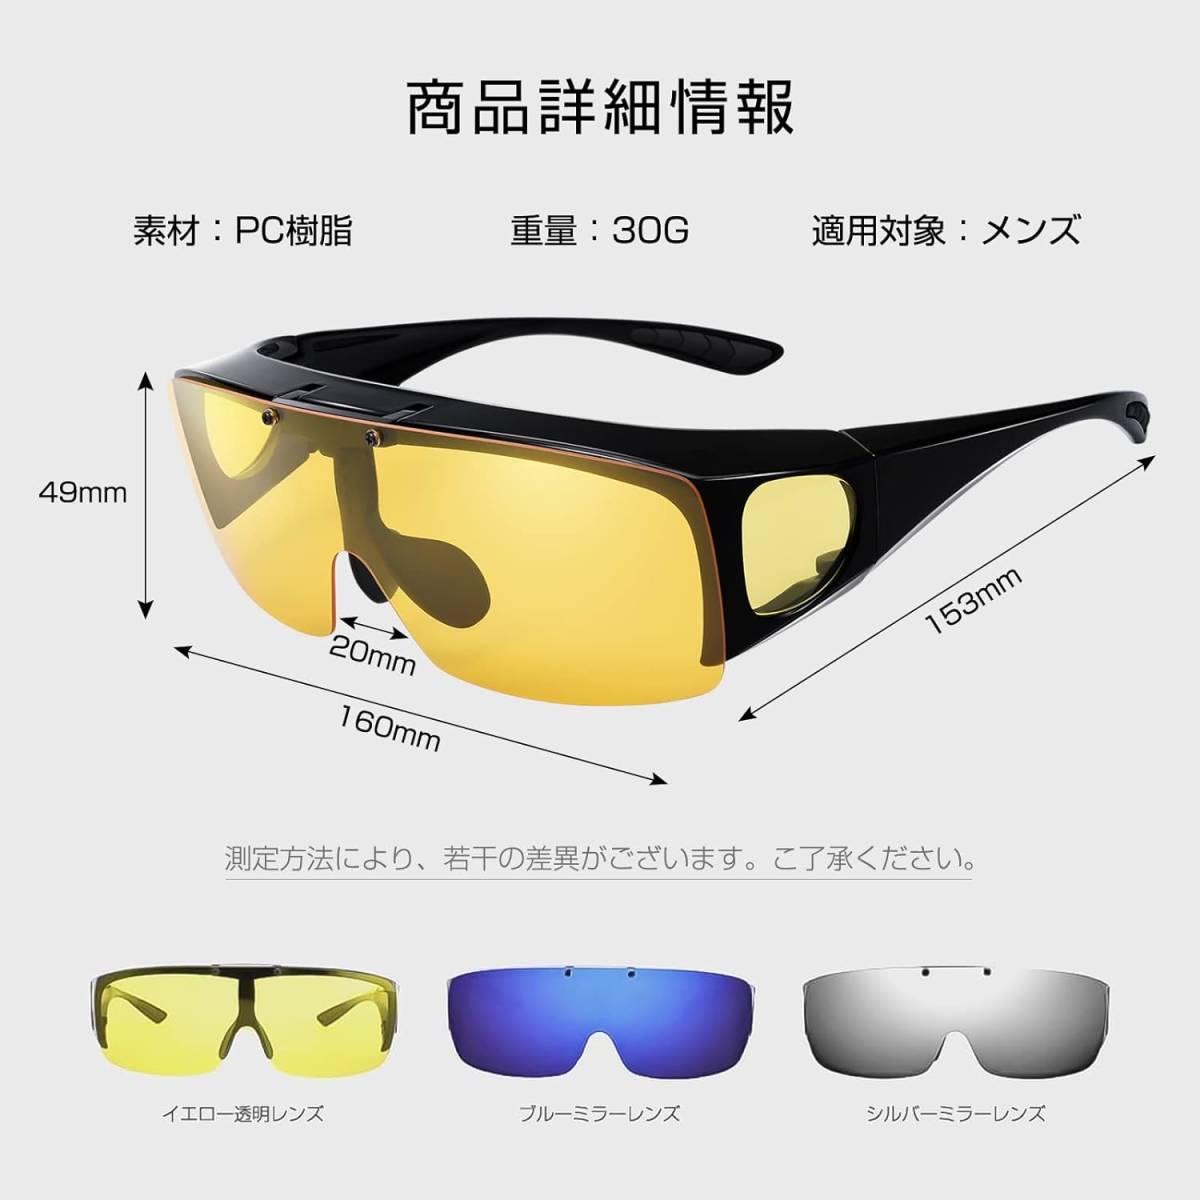  glasses. on have on is possible tip-up type polarized light sunglasses over sunglasses UV400 UV resistance bicycle running Golf baseball yellow 